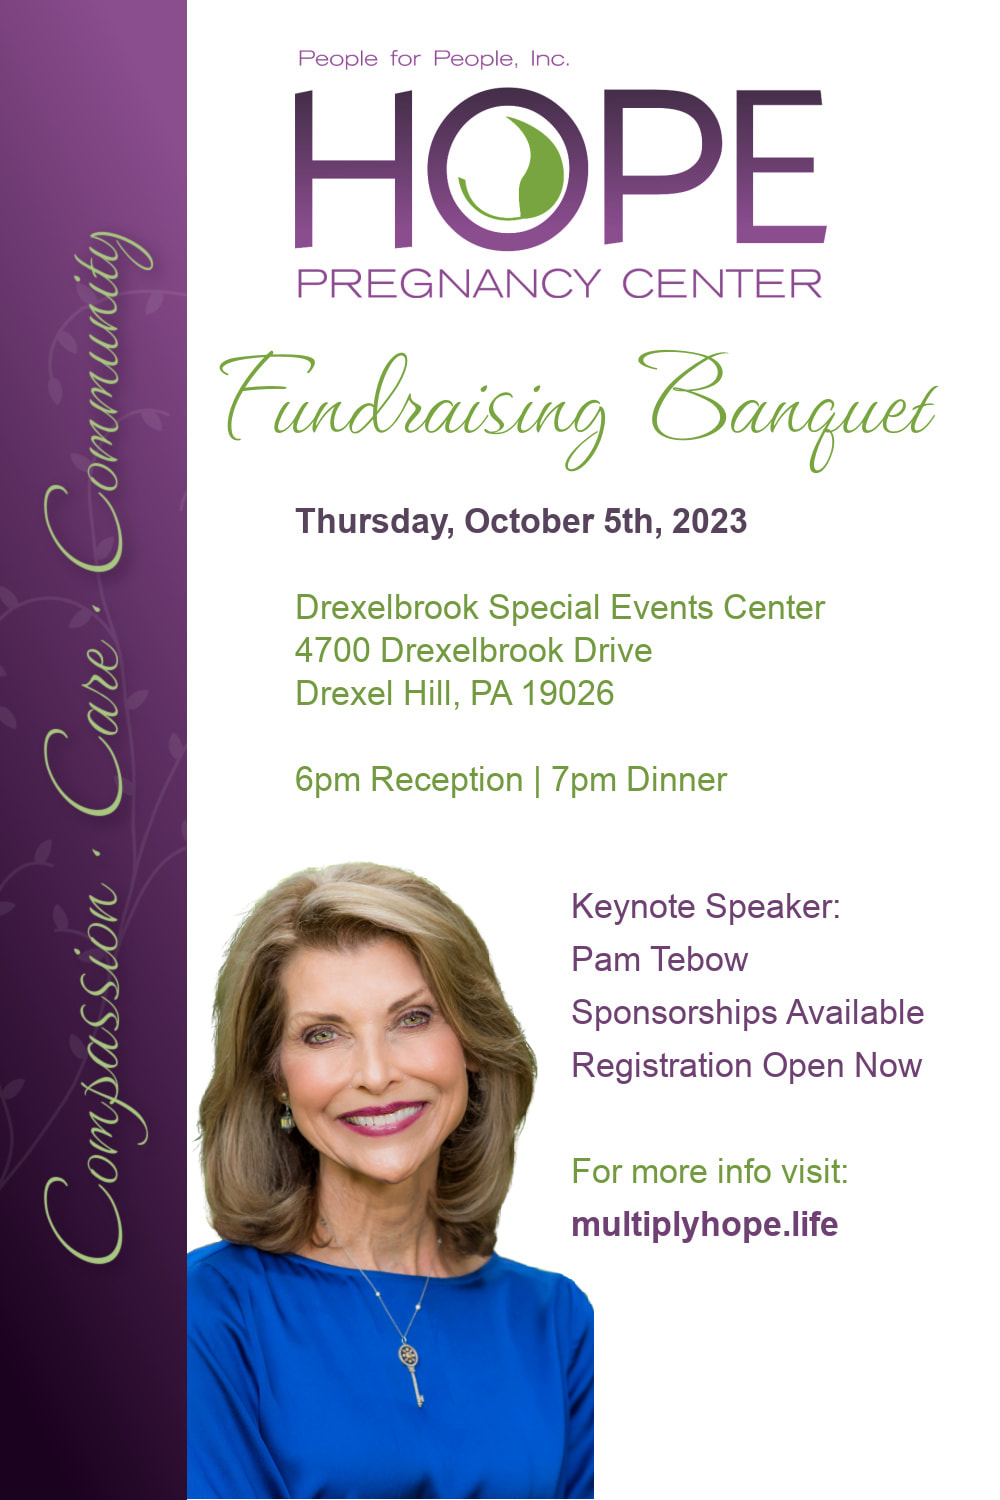 Invitation to the HOPE Pregnancy Center's Fundraising Banquet Sept. 29th, 2022